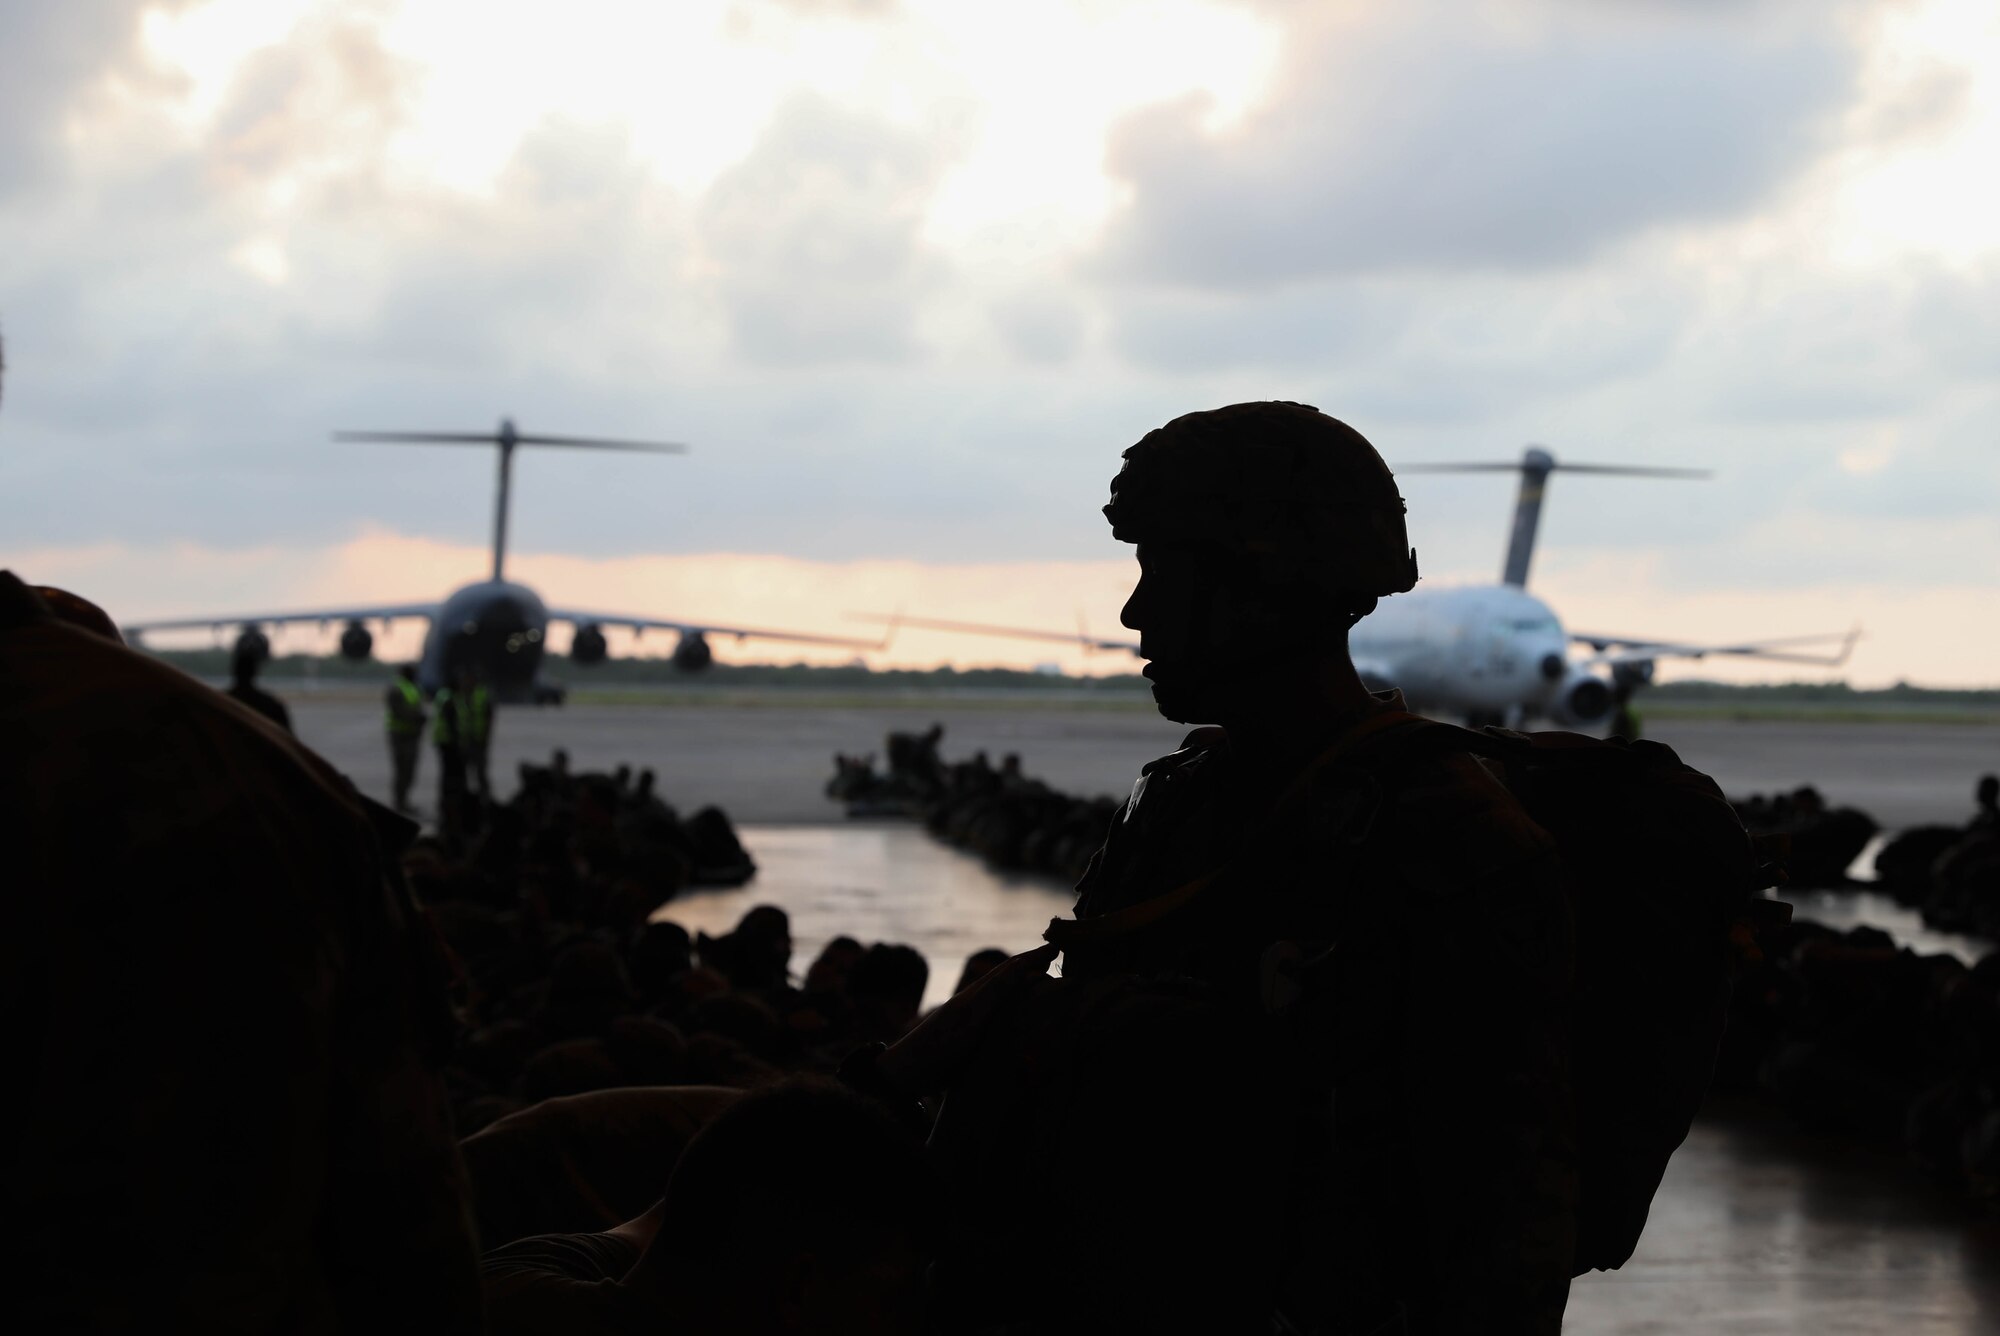 A photo of a man's silhouette on a flightline during an exercise.